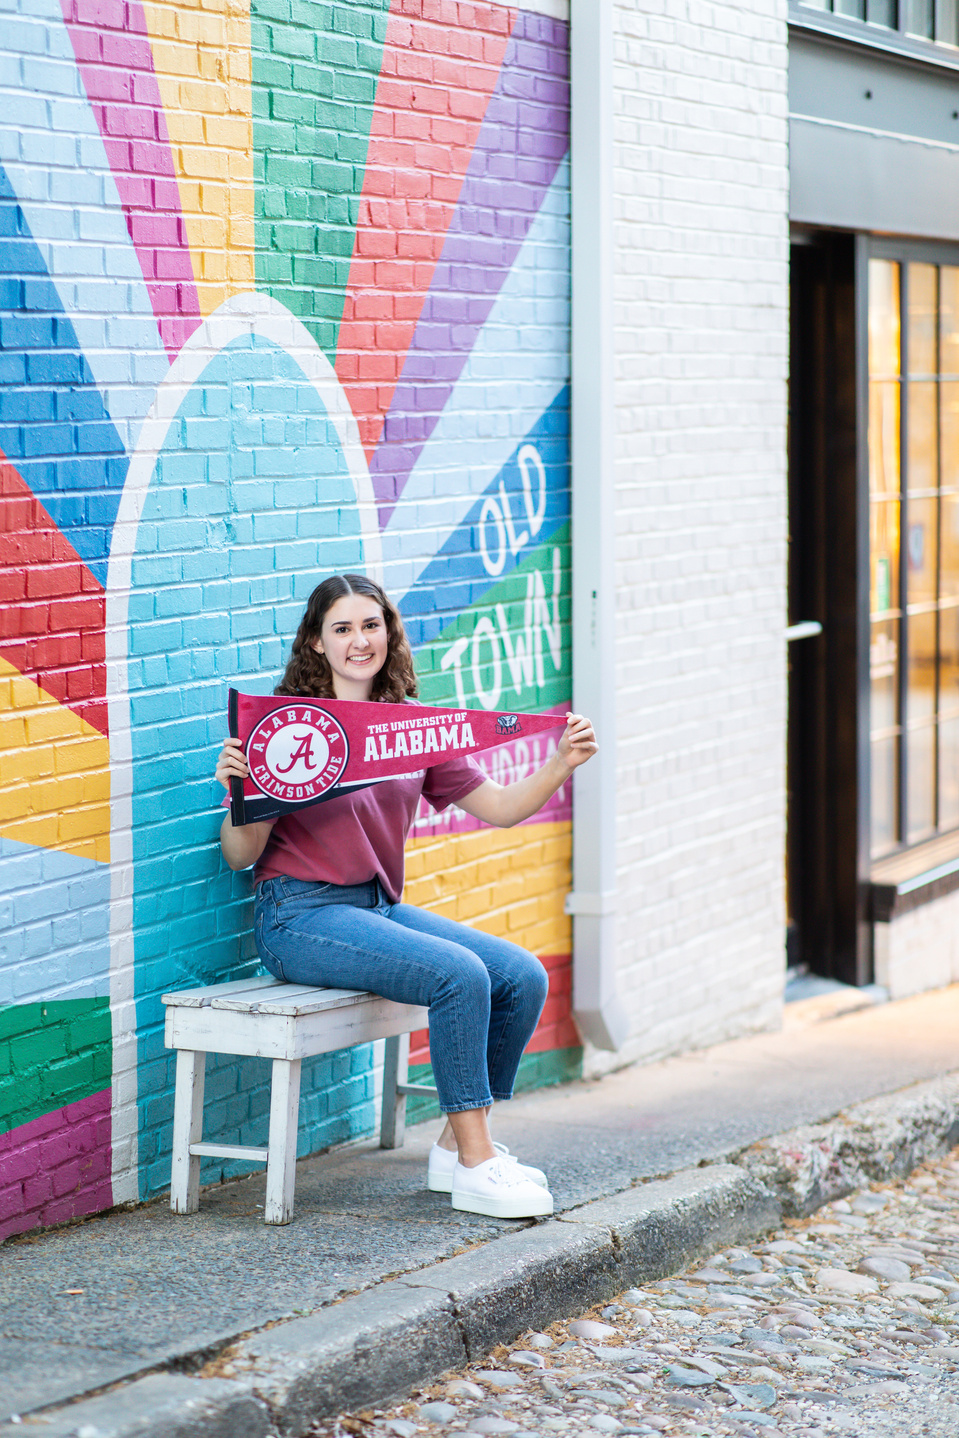 Girl sat on a bench holding a sign reading "University of Alabama" with a rainbow background and the words "Old Town Alexandria" .